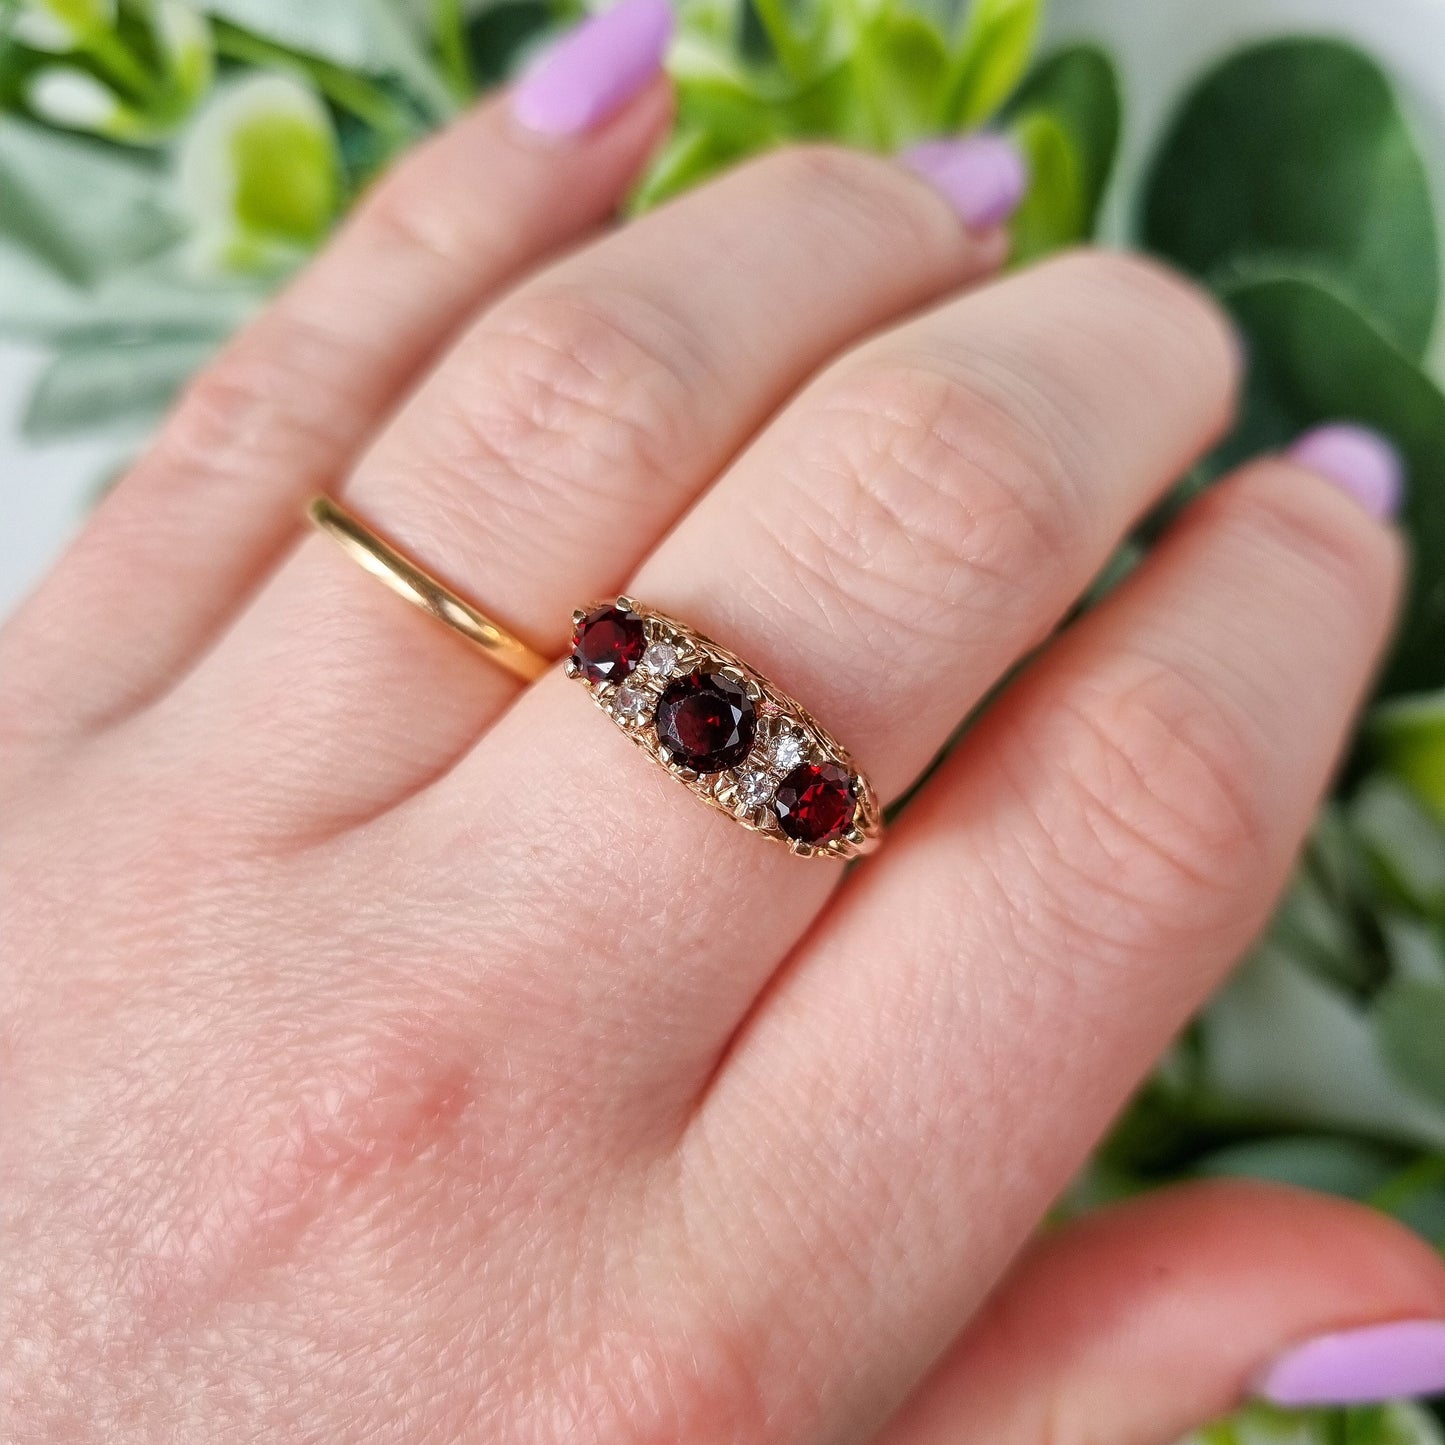 Vintage 9ct Yellow Gold Garnet and White Topaz Ring